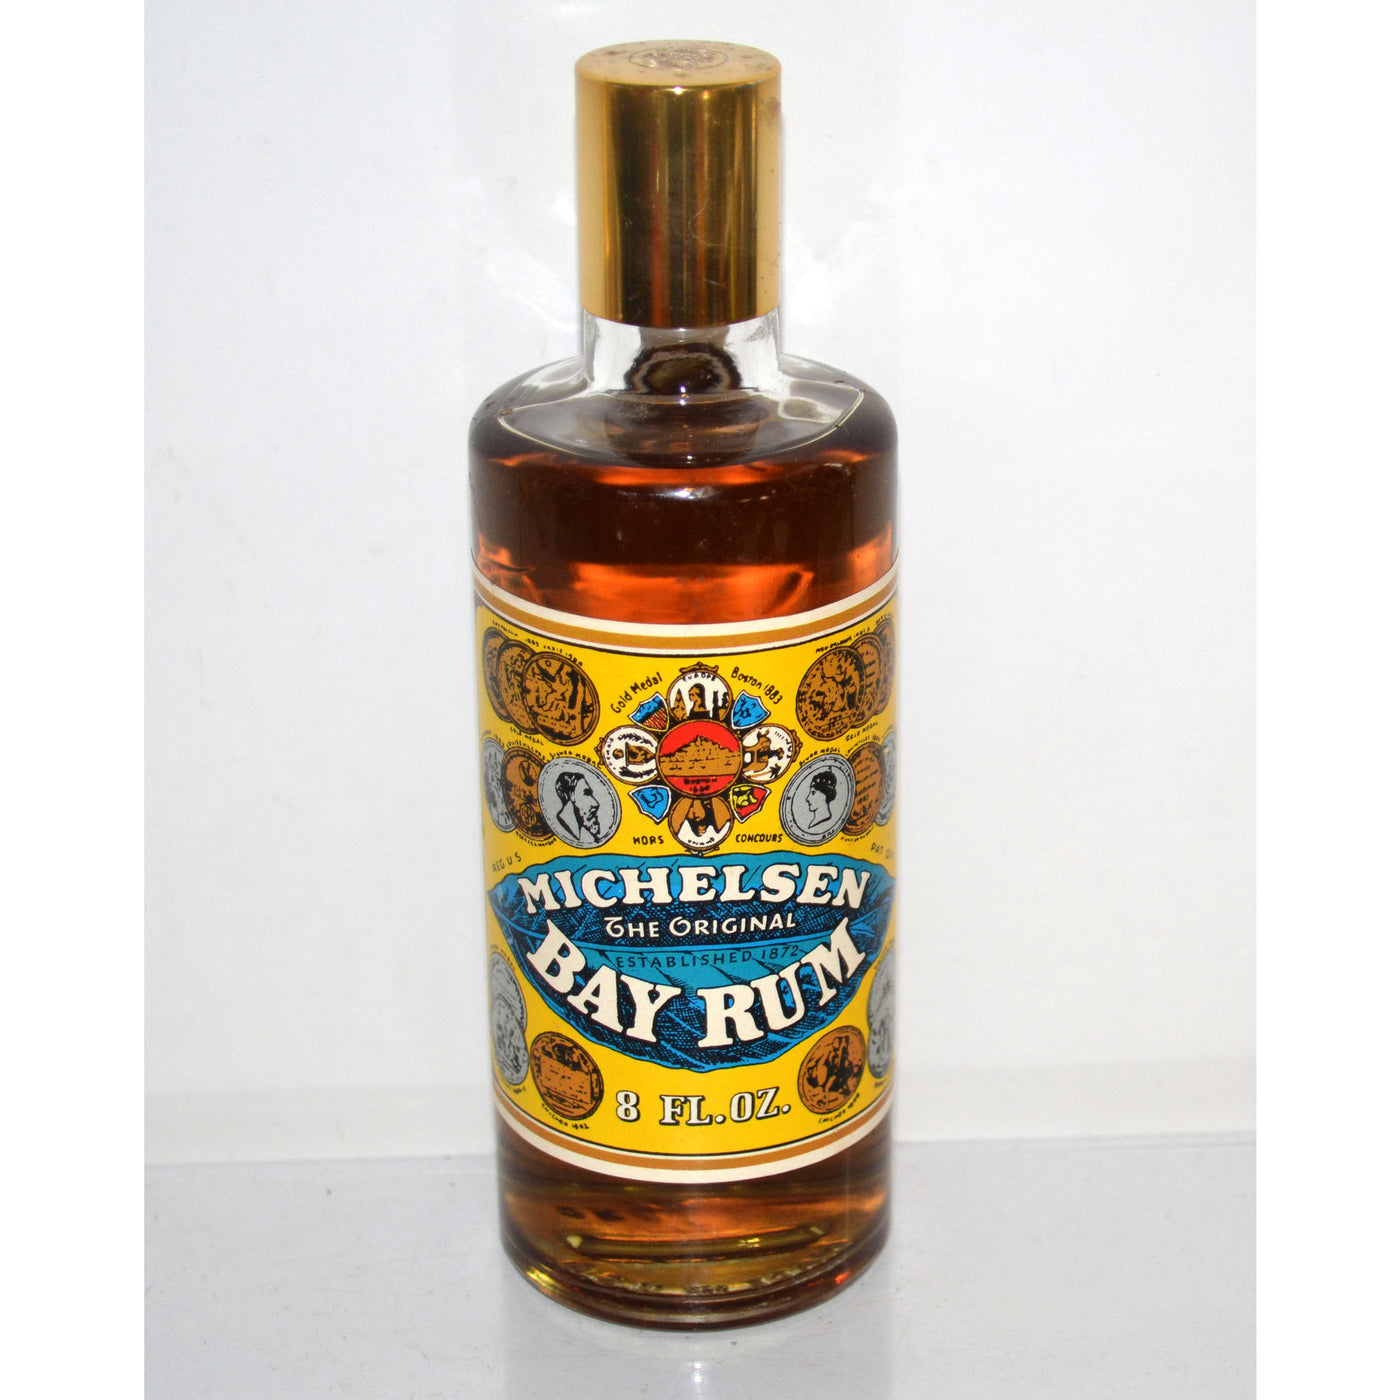 Vintage Michelsen The Original Bay Rum By Casewell-Massey 